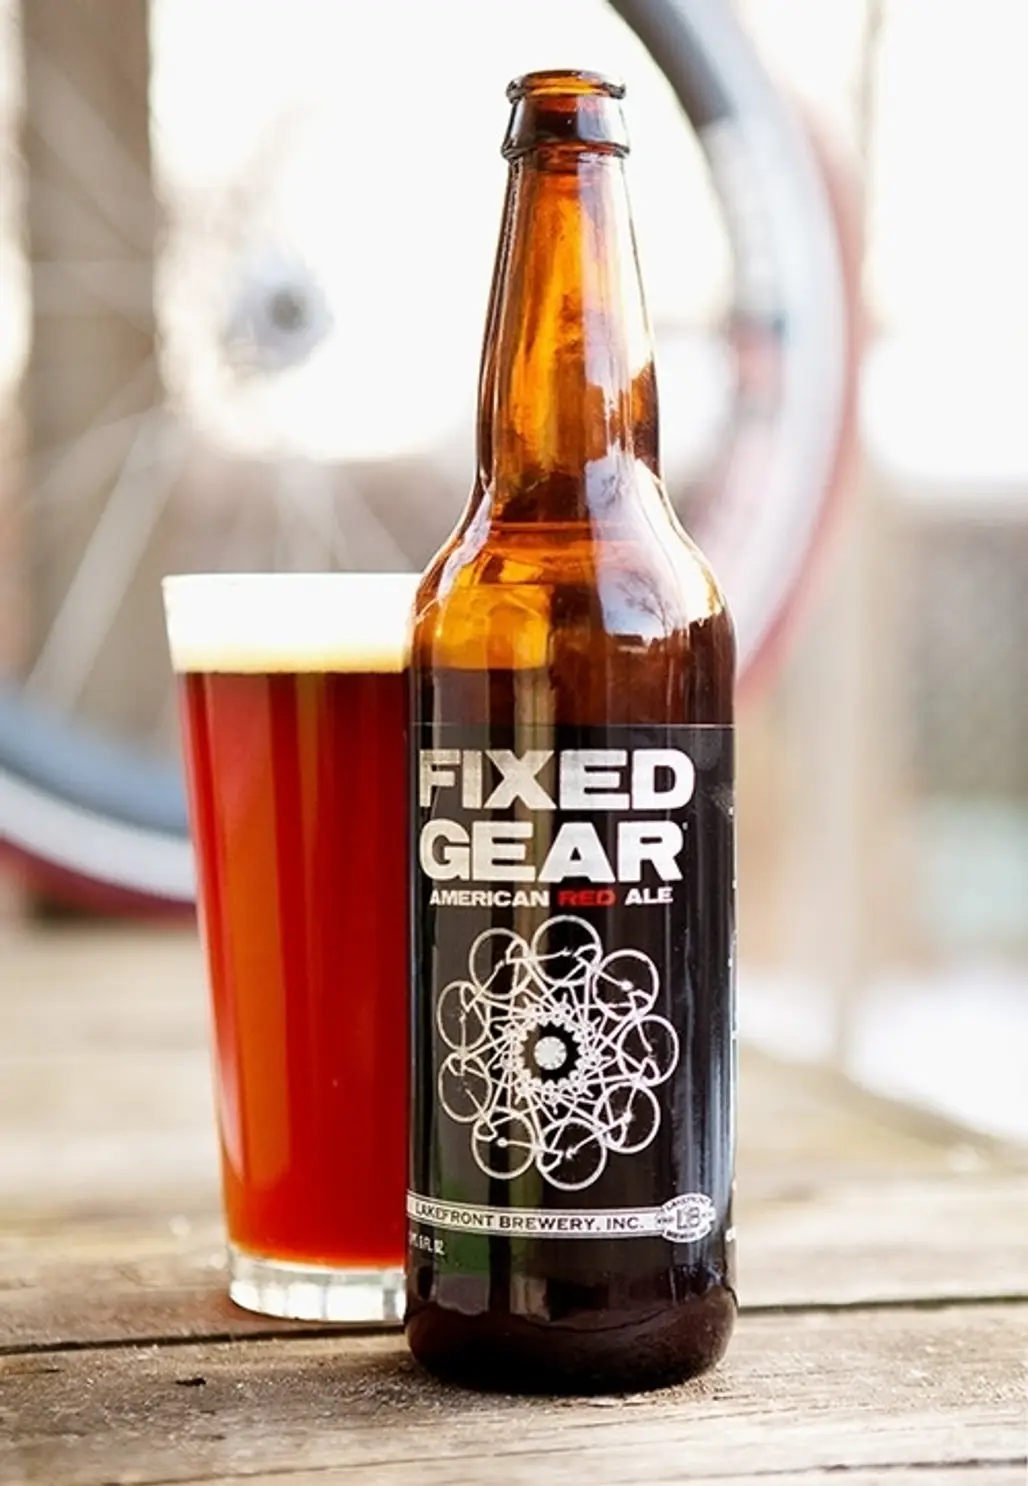 Lakefront Fixed Gear,Fixed Gear American Red Ale,beer bottle,drink,alcoholic beverage,